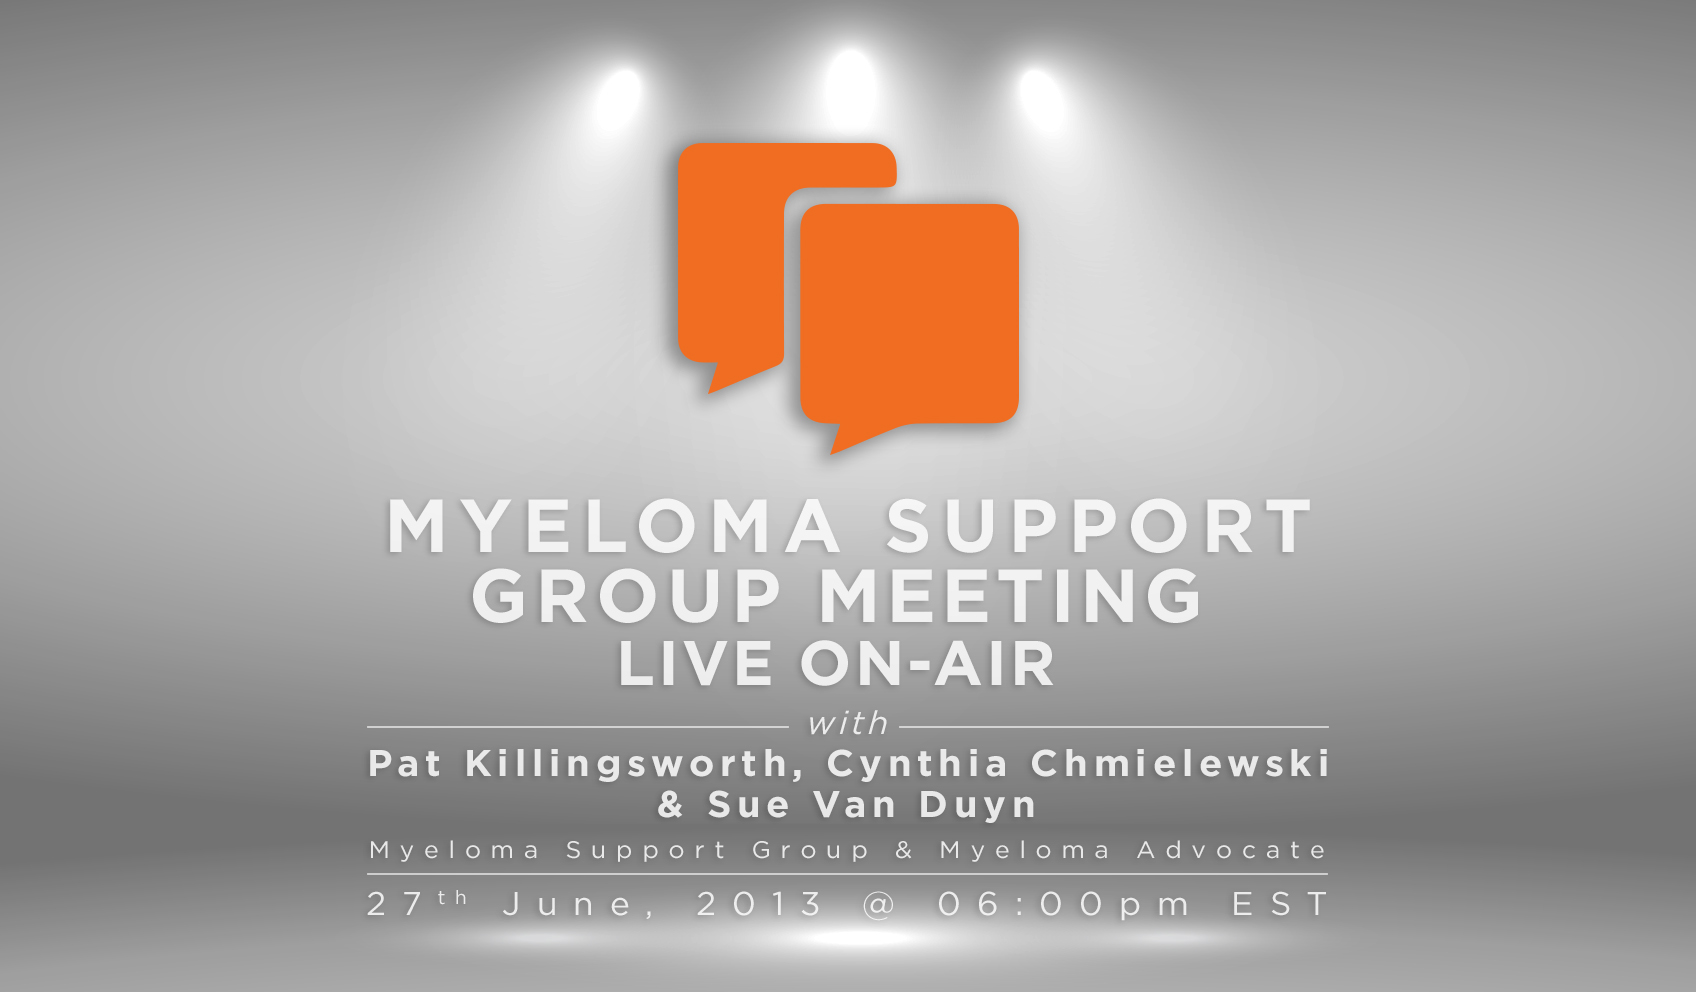 Live On-Air Myeloma Support Group Meeting